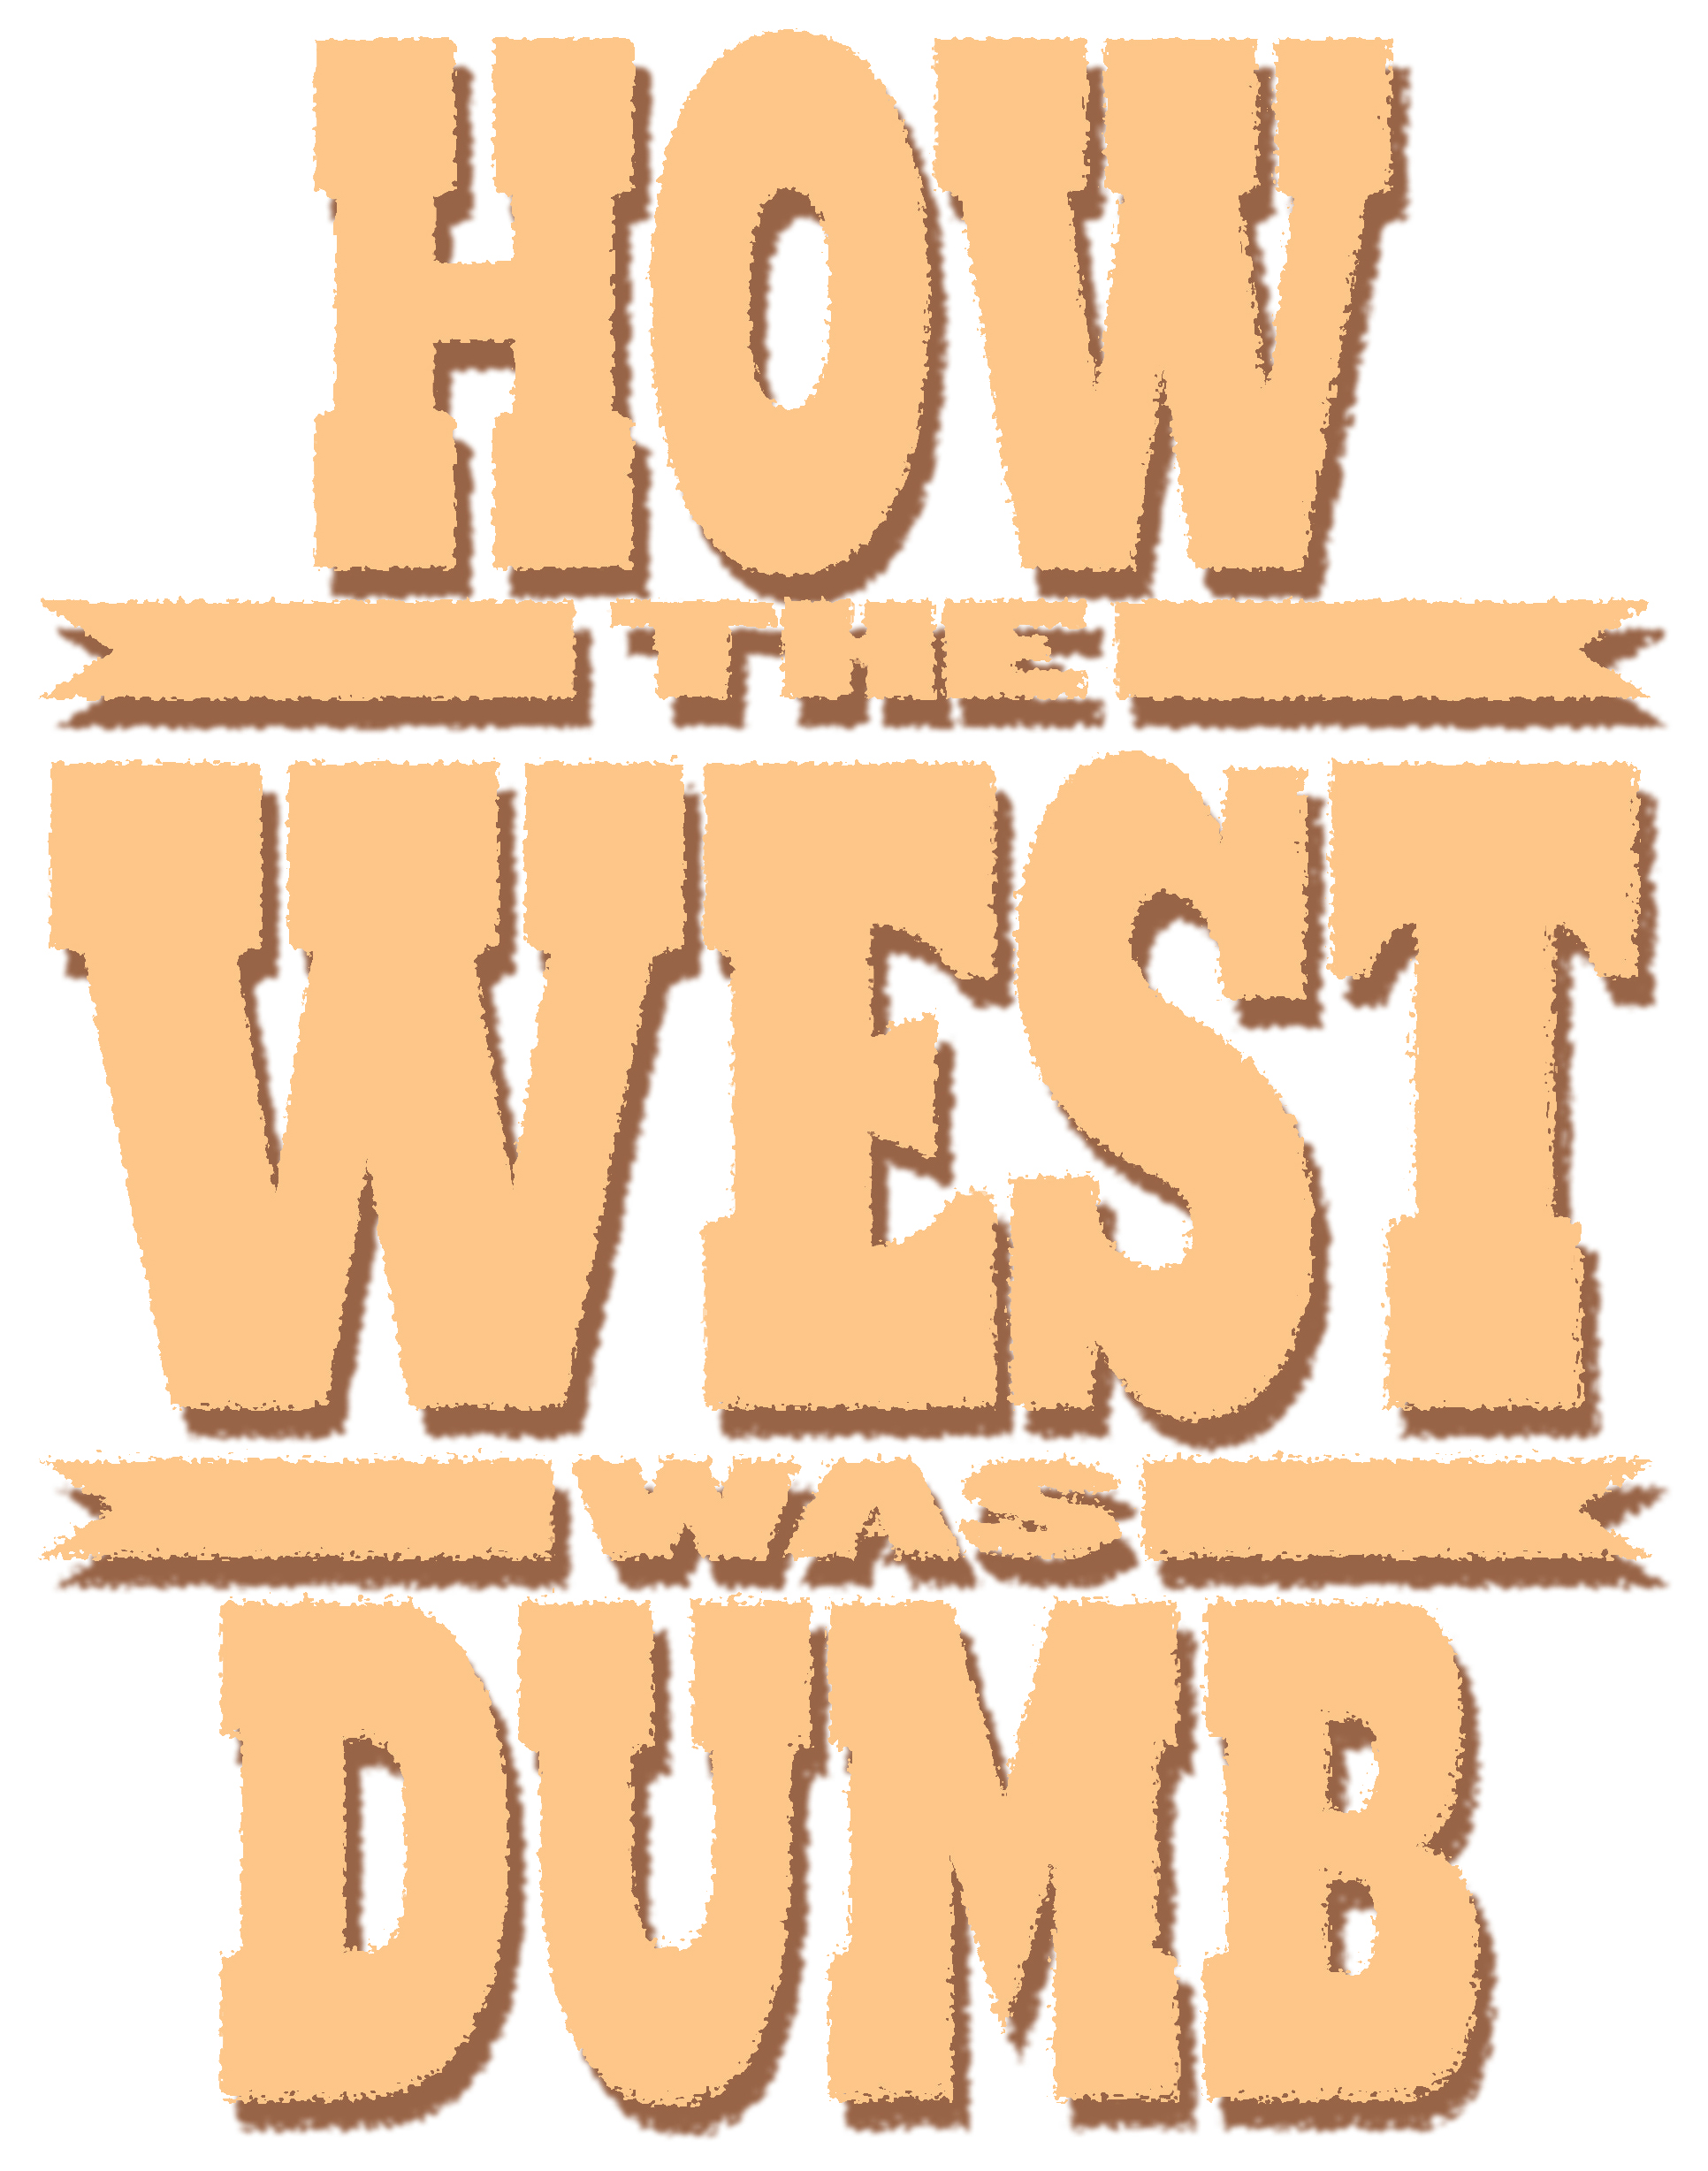 How the West Was Dumb